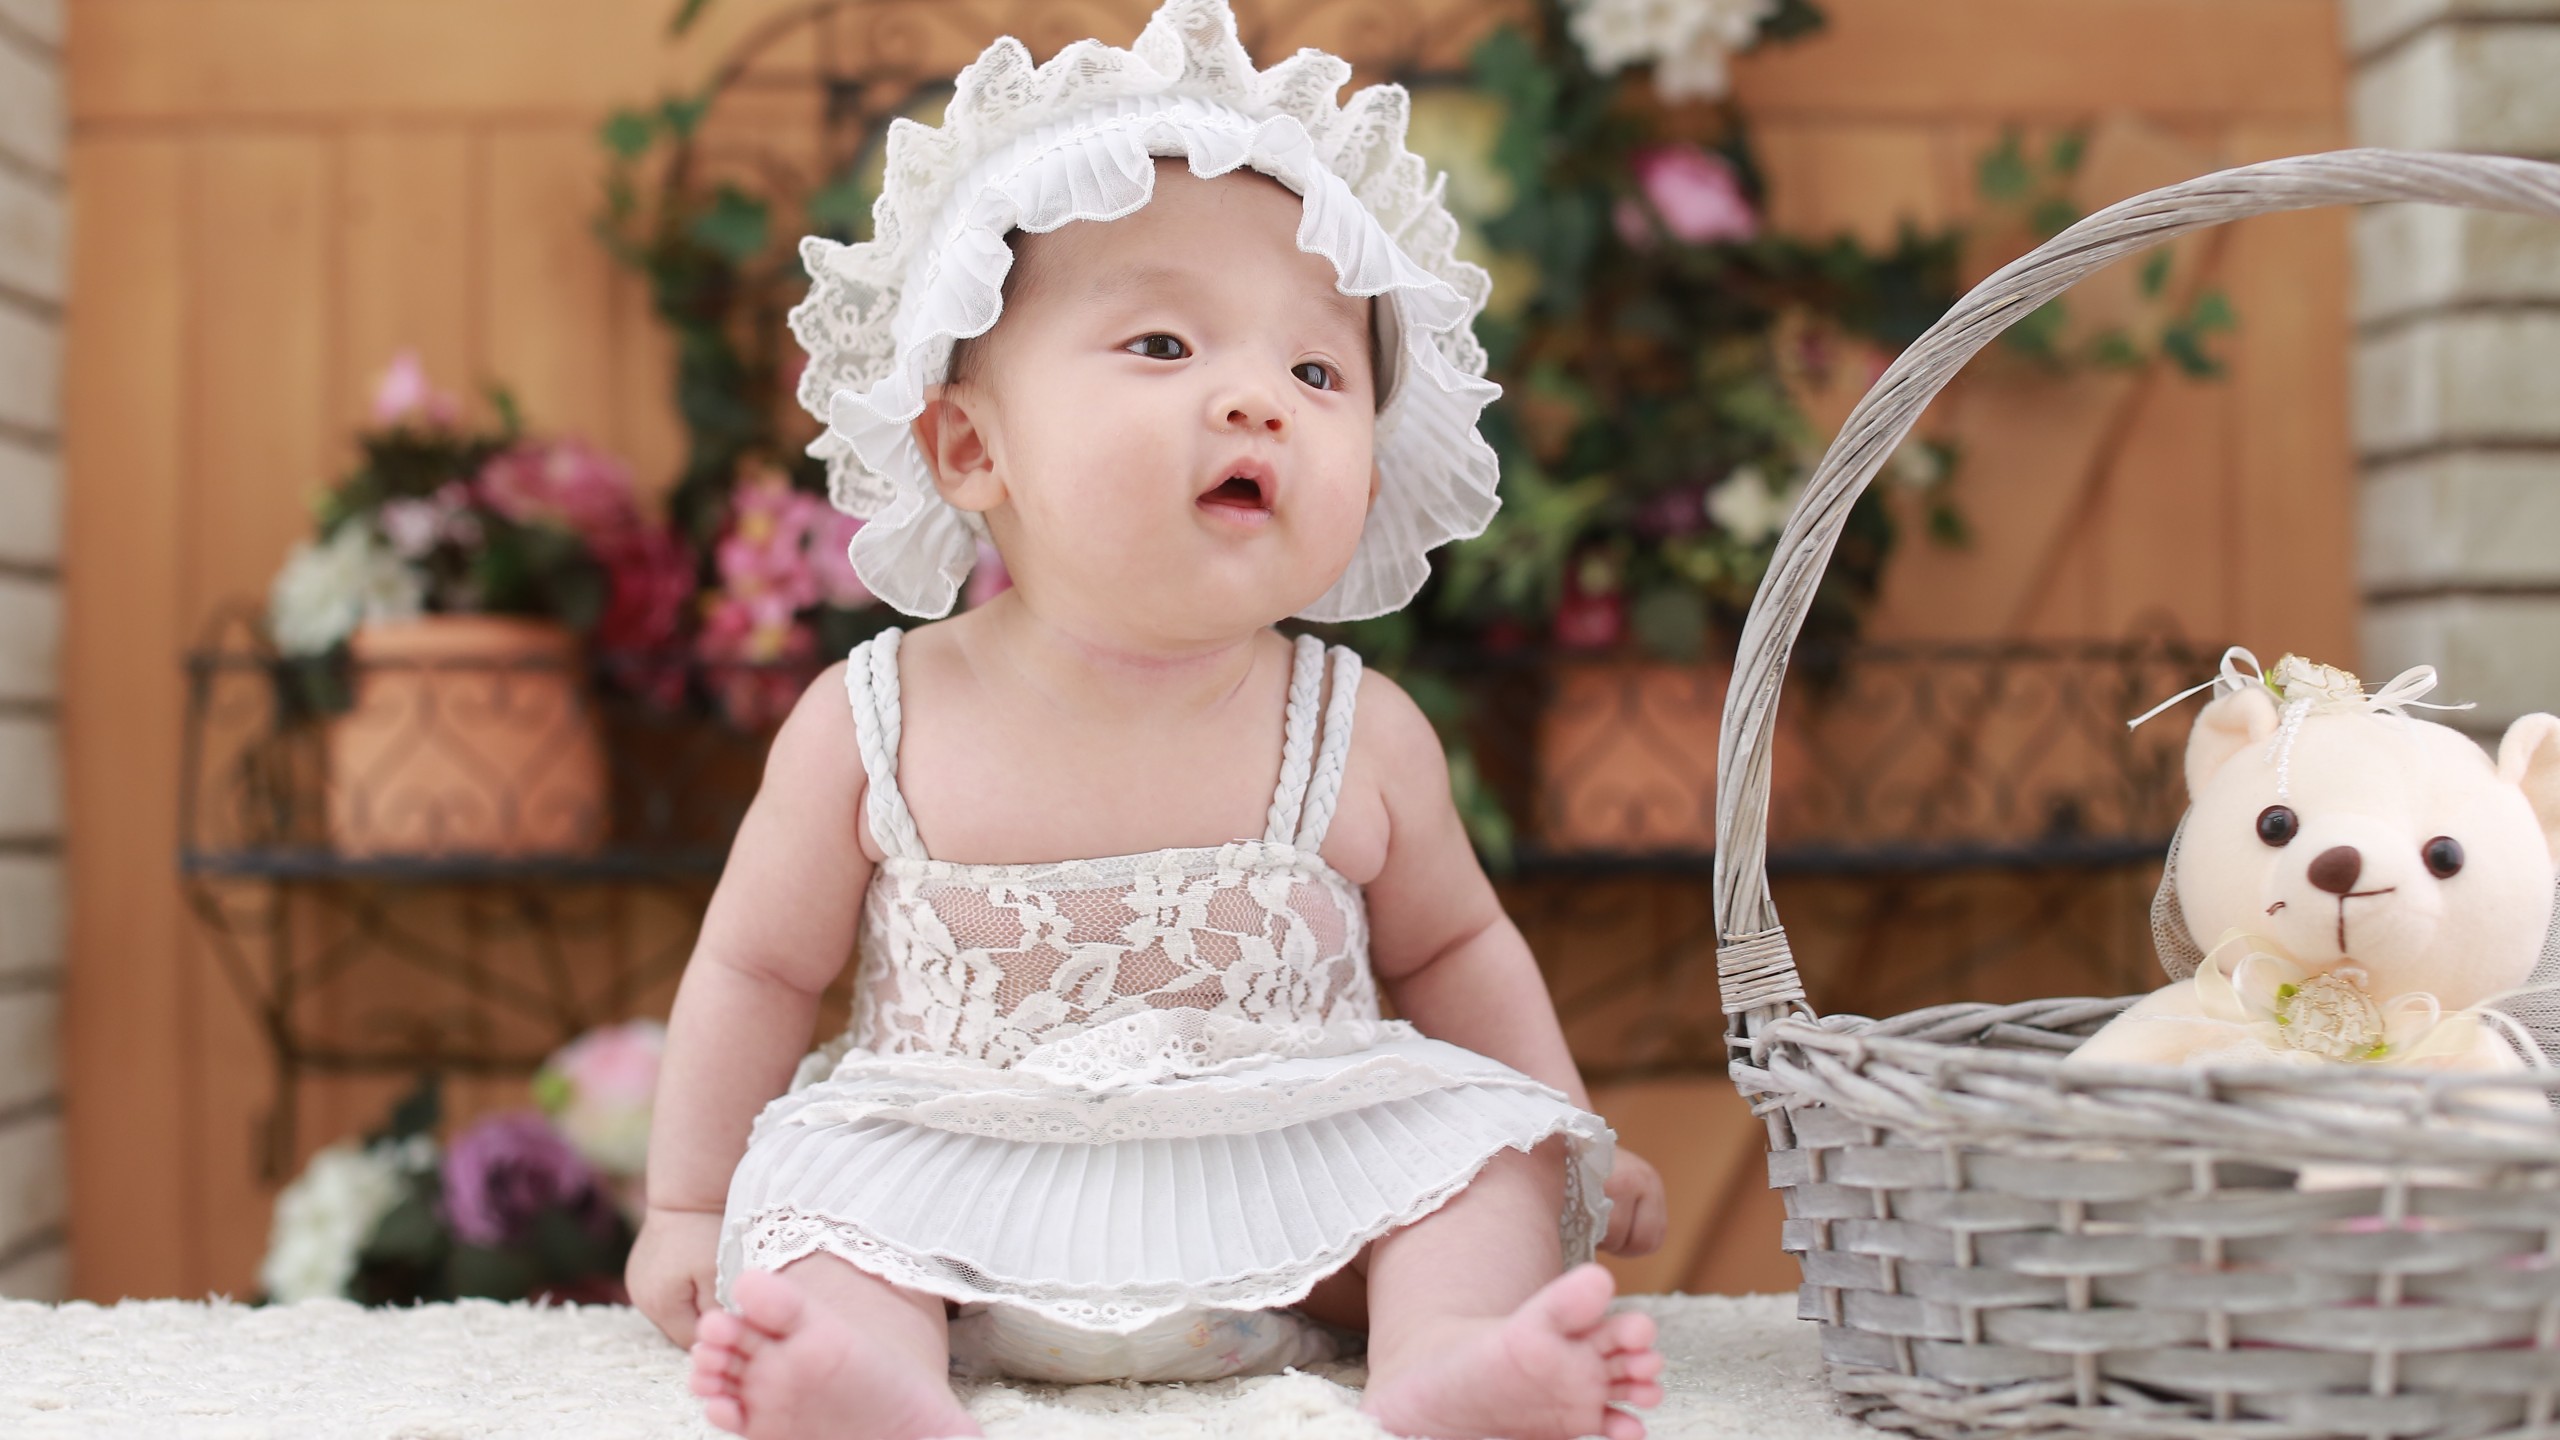 Cute Baby Hd Wallpaper For Mobile - Girl Baby Images Download , HD Wallpaper & Backgrounds